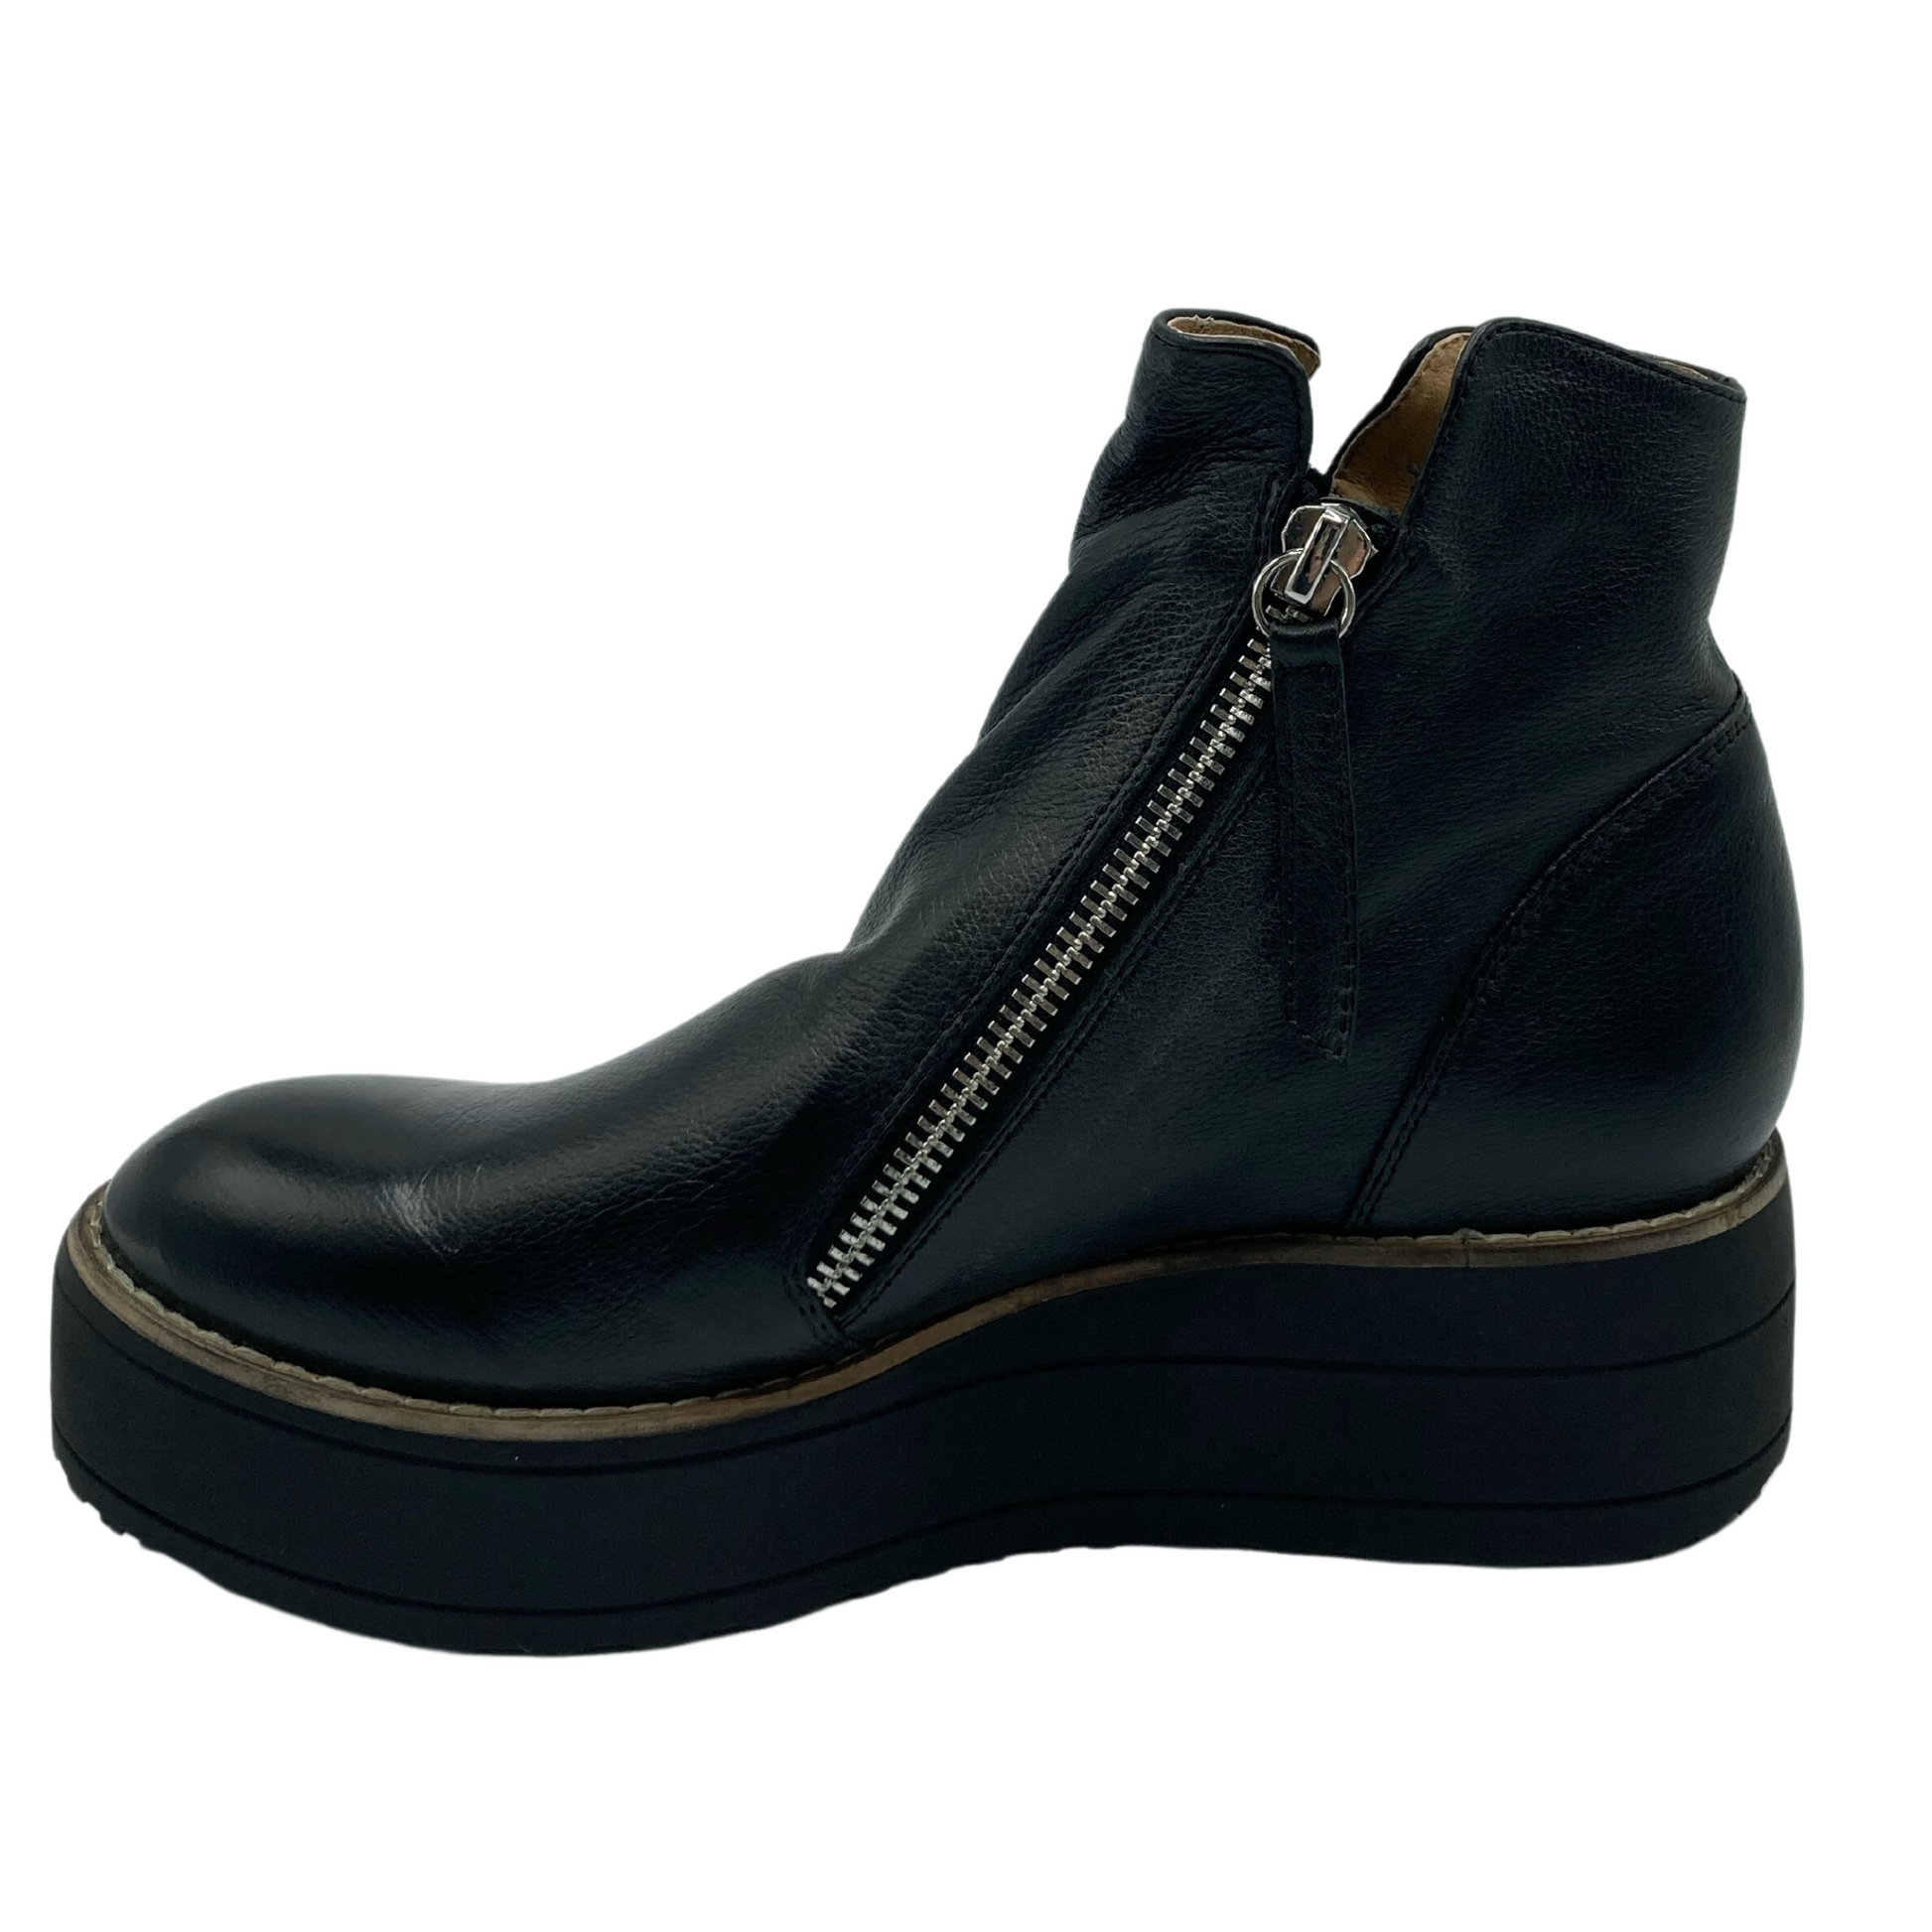 Left facing profile view of black platform short boot with leather upper and silver angled zipper